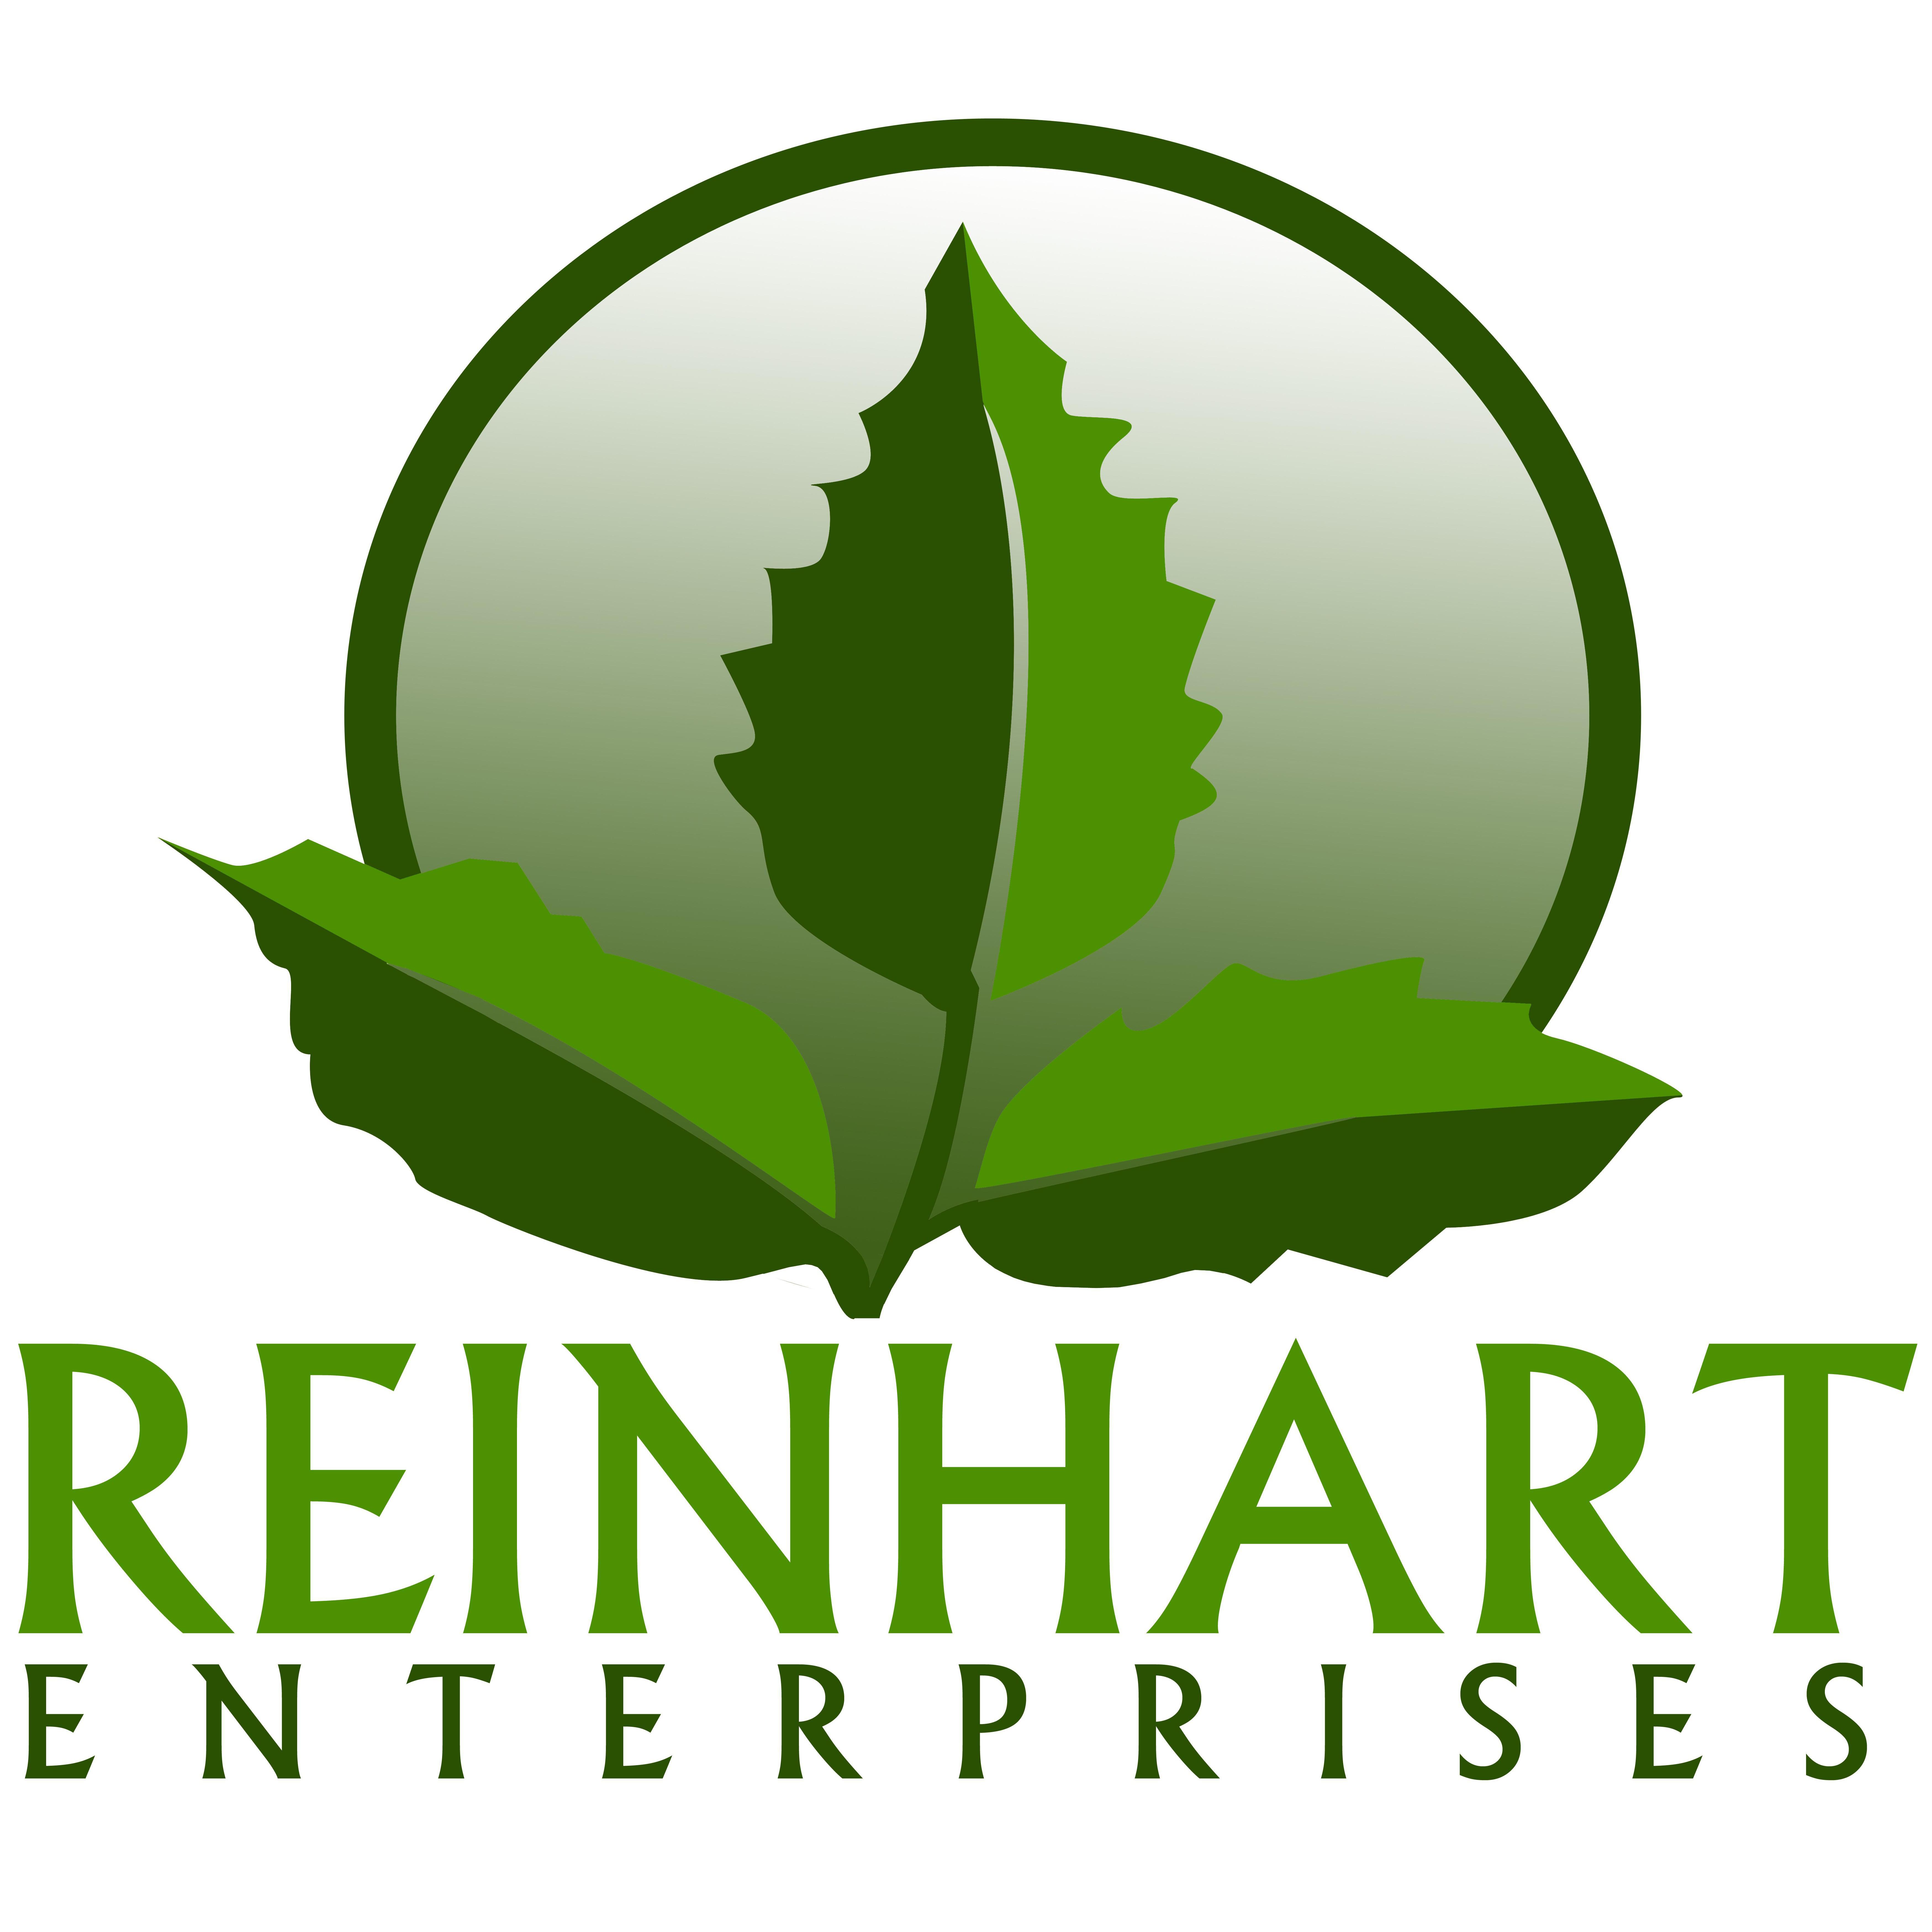 Reinhart Enterprises Landscaping and Lawn Care, LLC - Amherst, NY 14226 - (716)207-2352 | ShowMeLocal.com